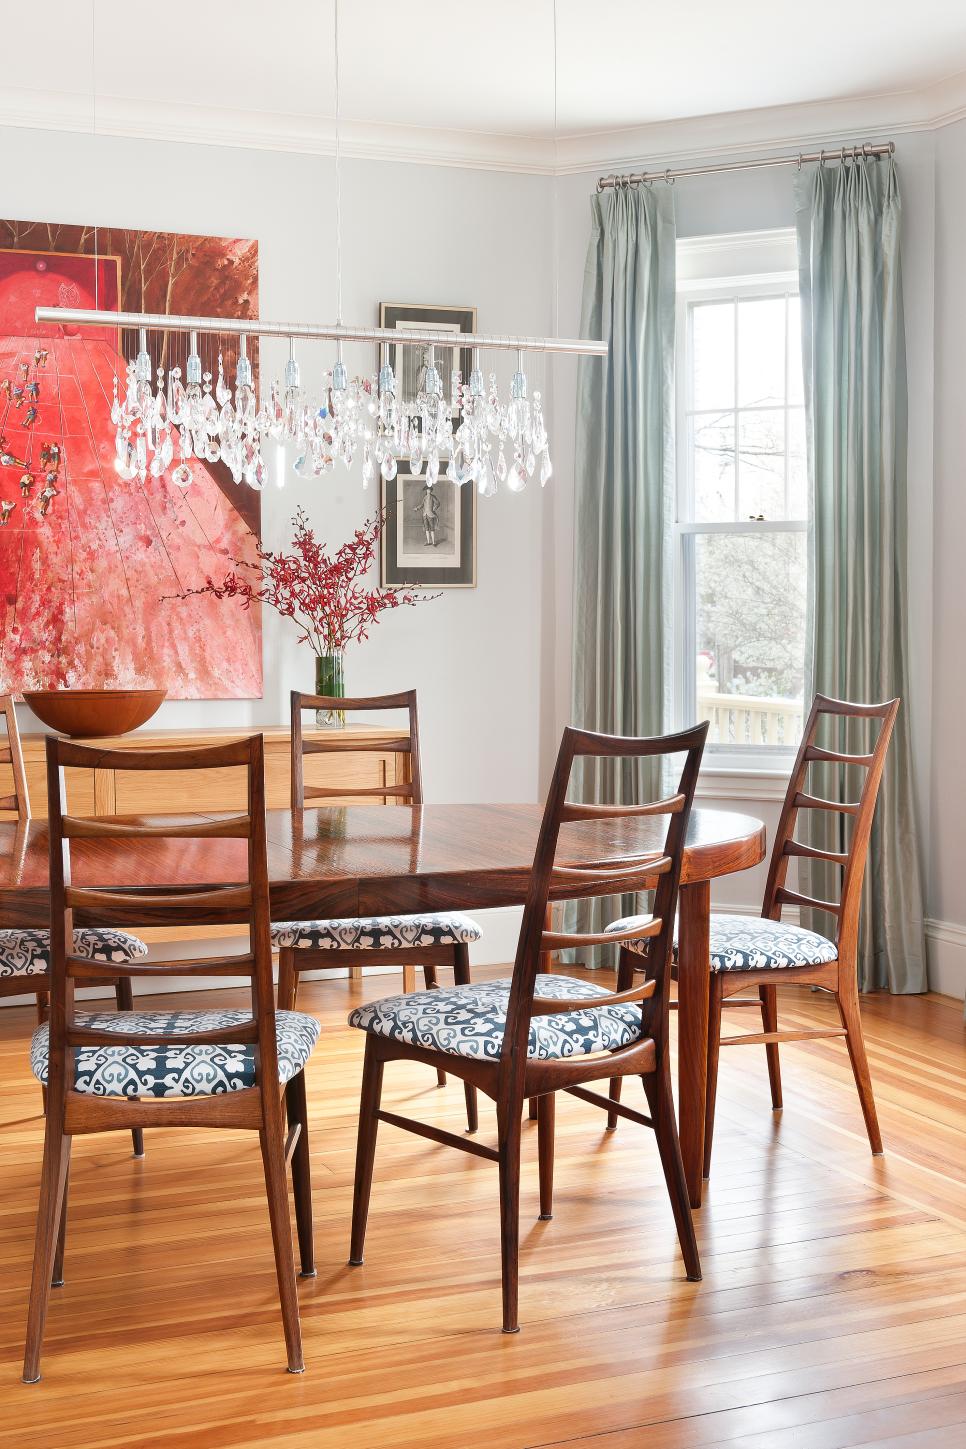 Mid-century Modern Dining Room With Crystal Chandelier | HGTV